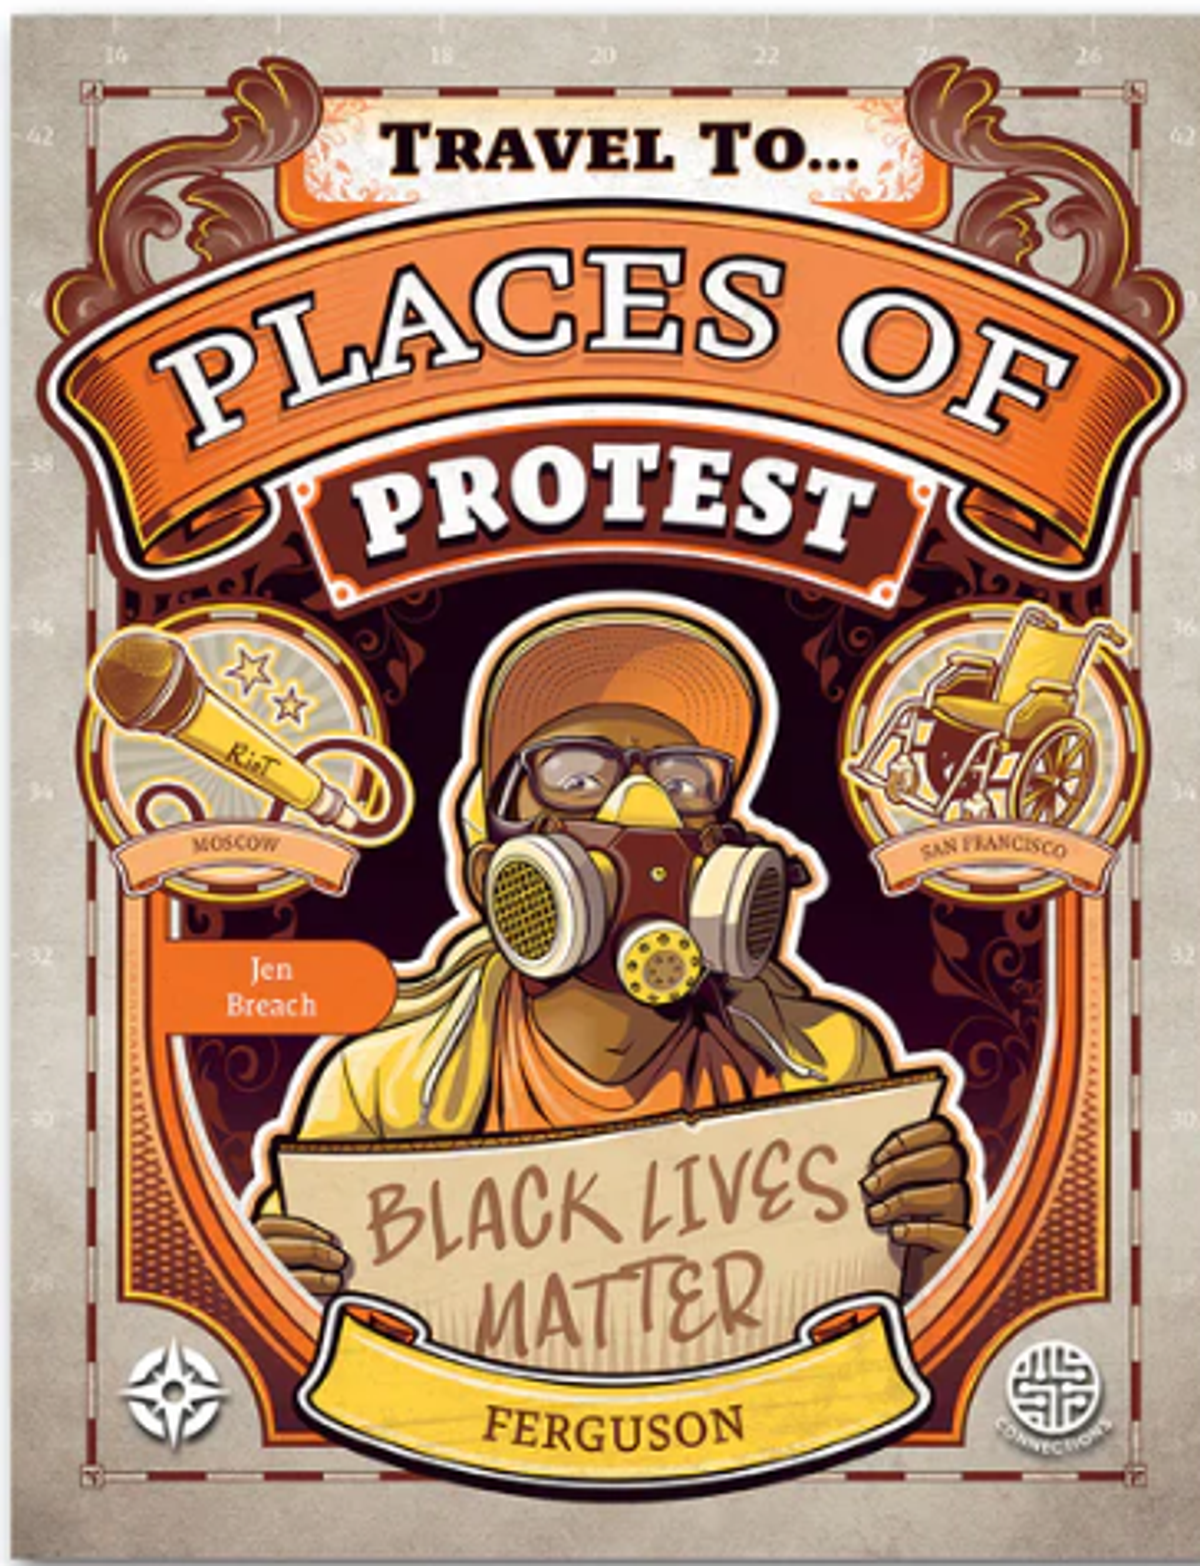 The cover image for Travel To...Places of Protest by Jen Breach shows a stylized illustration of a protestor in Ferguson wearing a gas mask and carrying a hands lettered sign reading "Black Lives Matter." Other images include a wheelchair, denoting the San Francisco sit ins for disability legislation, and a microphone denoting the Pussy Riot music and videos protesting Putin's presidency.